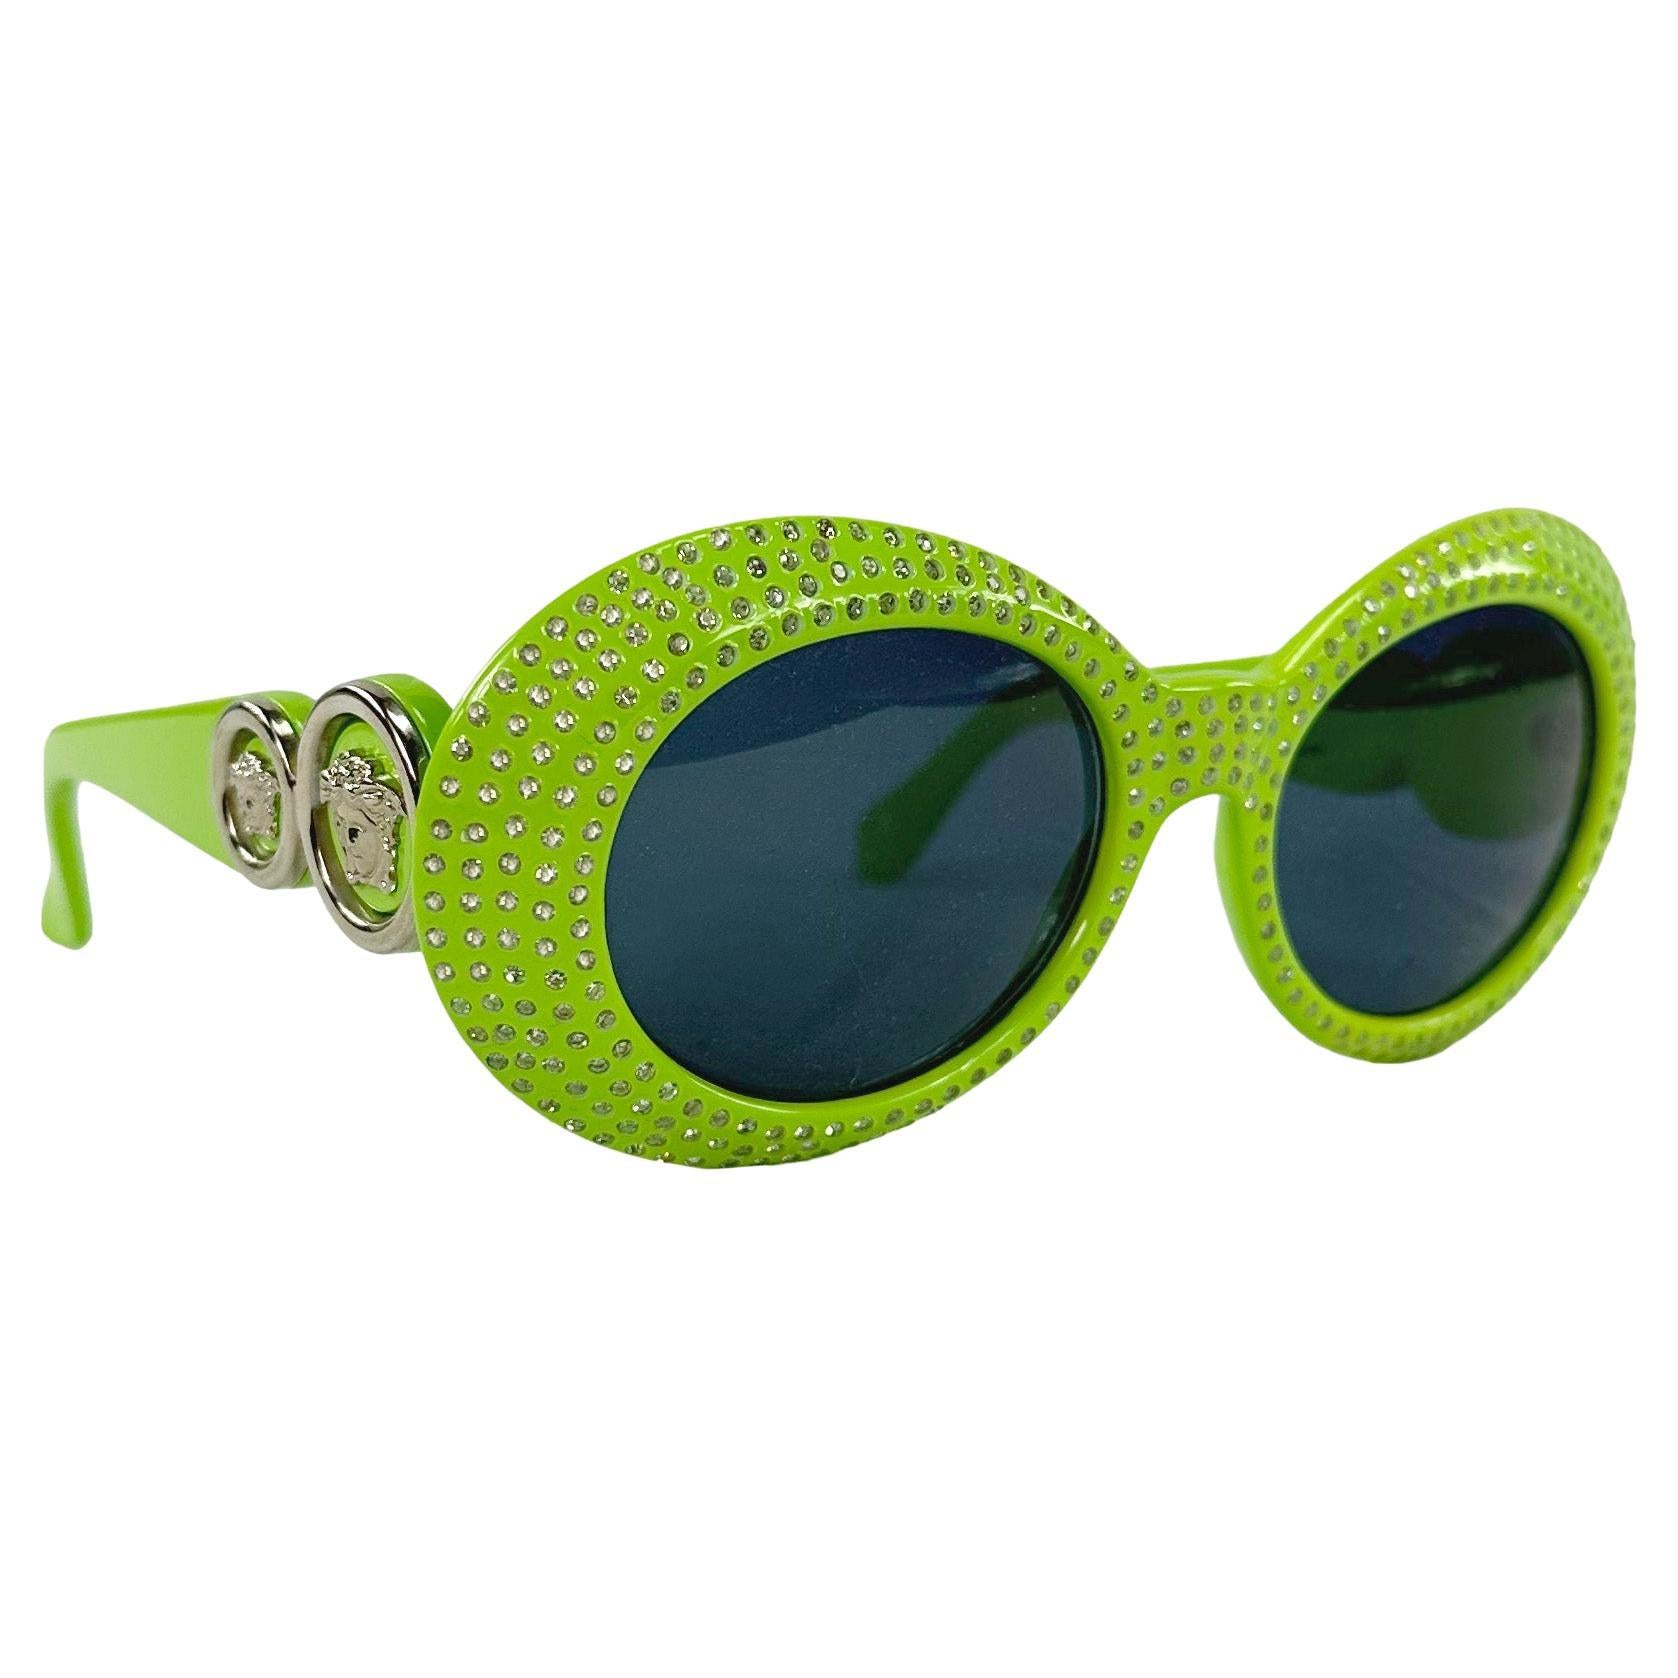 S/S 1996 Gianni Versace Lime Green Rhinestone Round Double Medusa Sunglasses For Sale